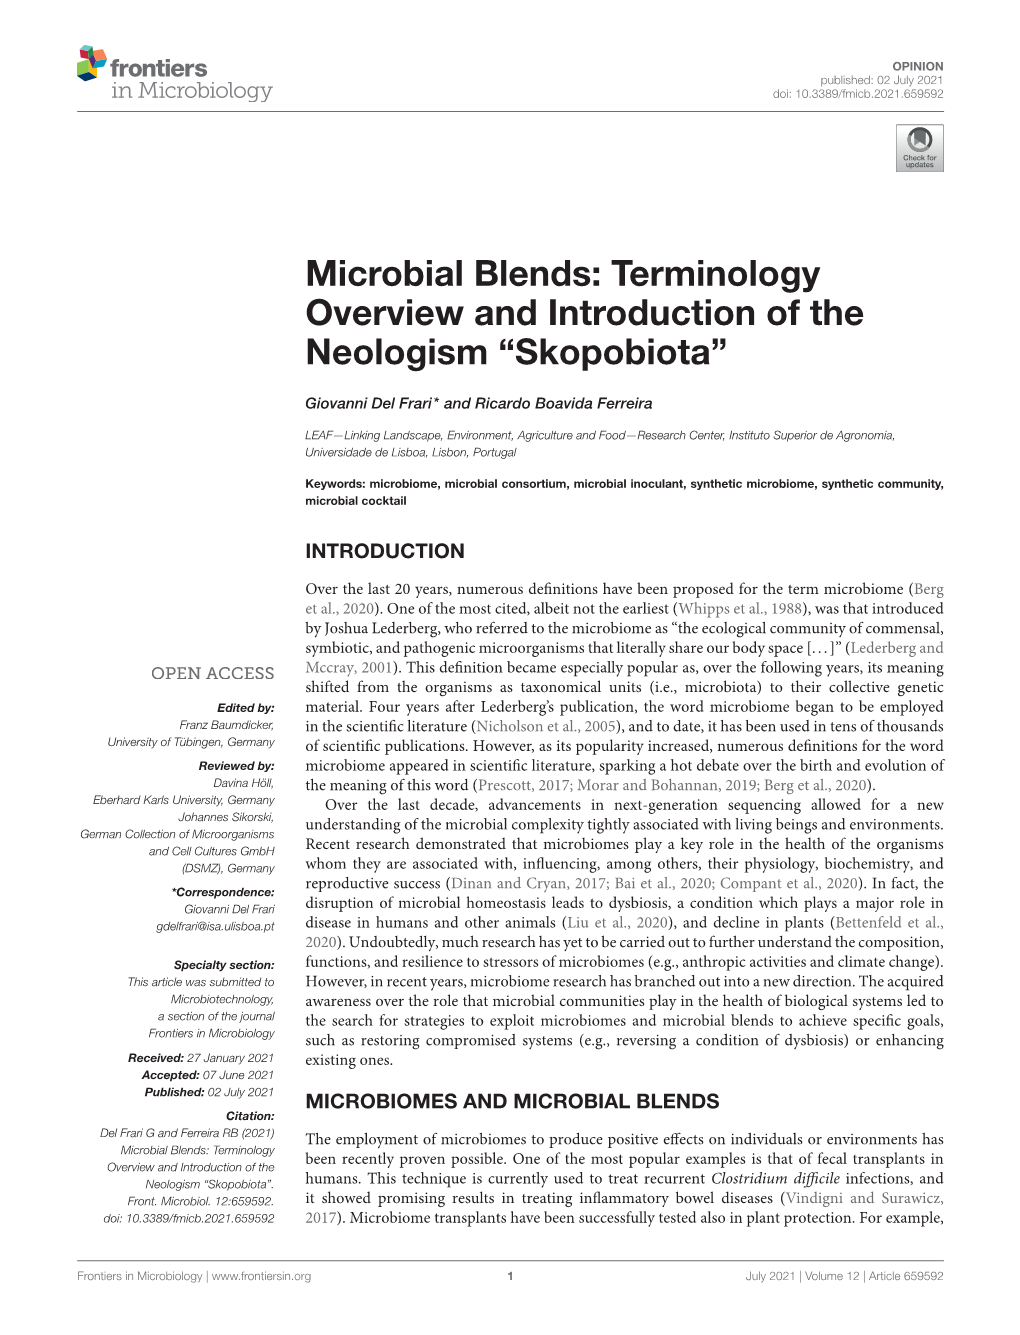 Microbial Blends: Terminology Overview and Introduction of the Neologism “Skopobiota”